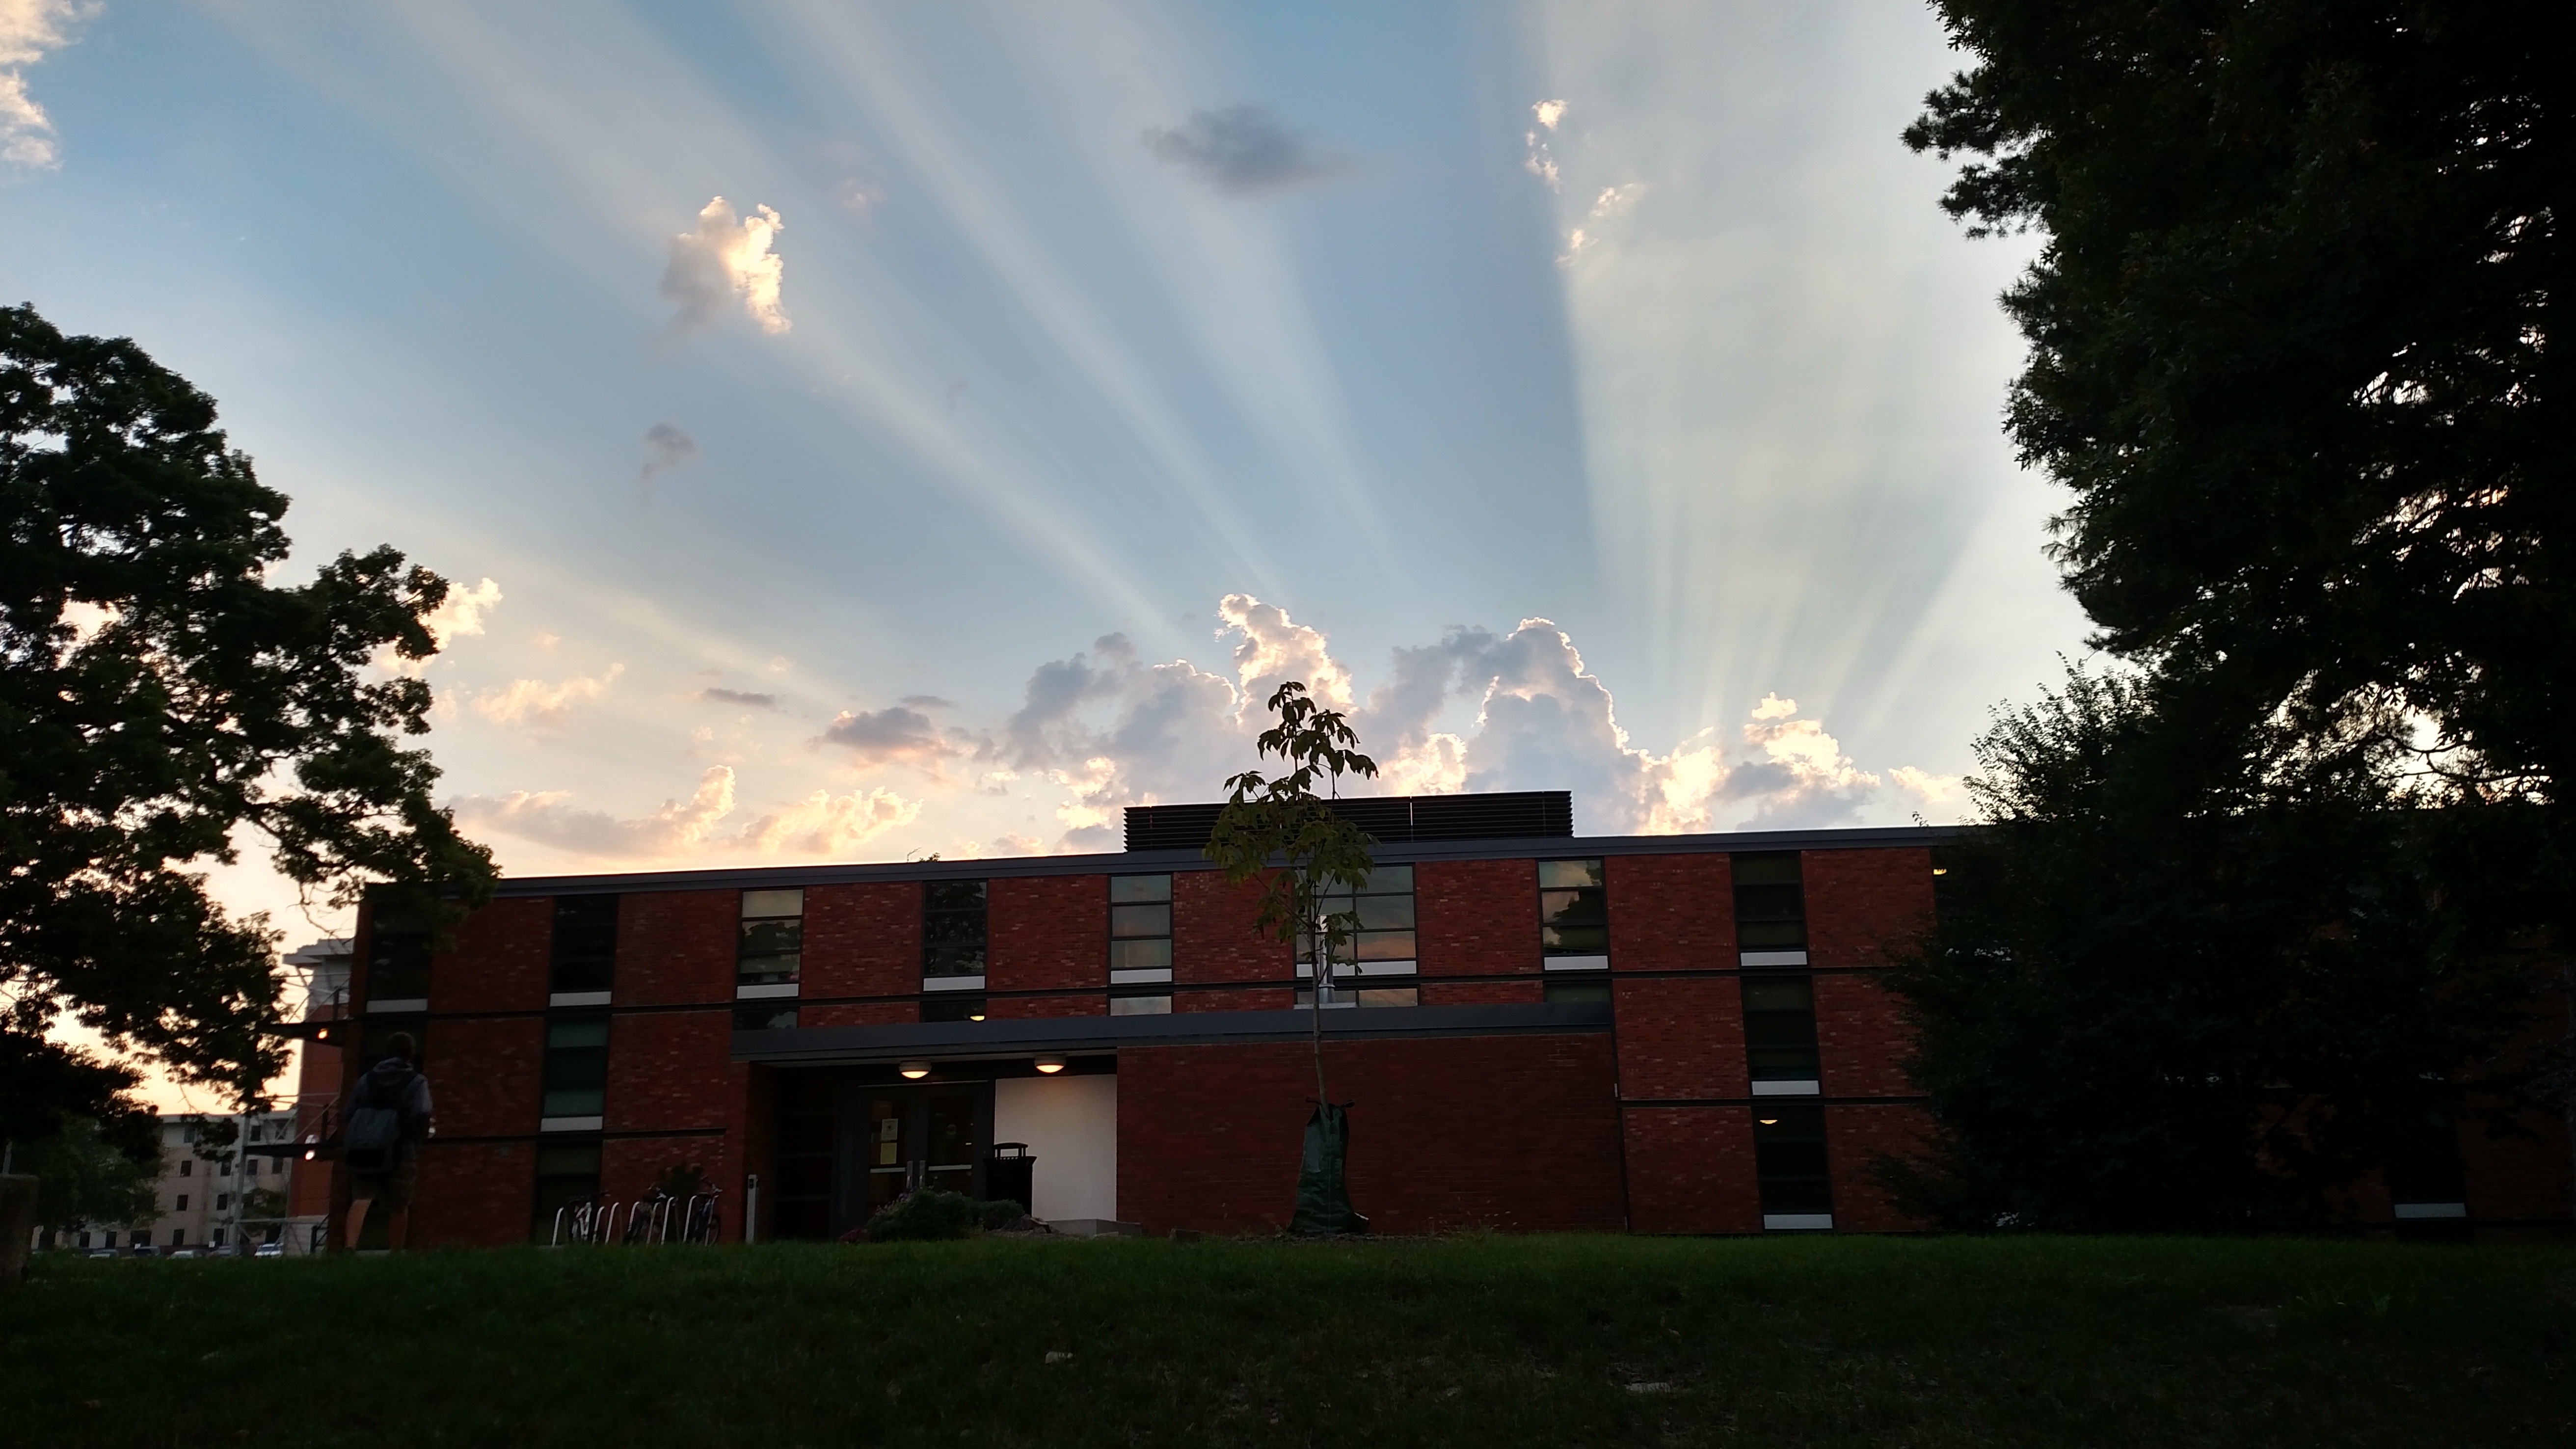 With each new day a new beginning rushes forward to greet us. Drake University can be that new beginning, and here, at Stalkaner hall a new day has dawned.